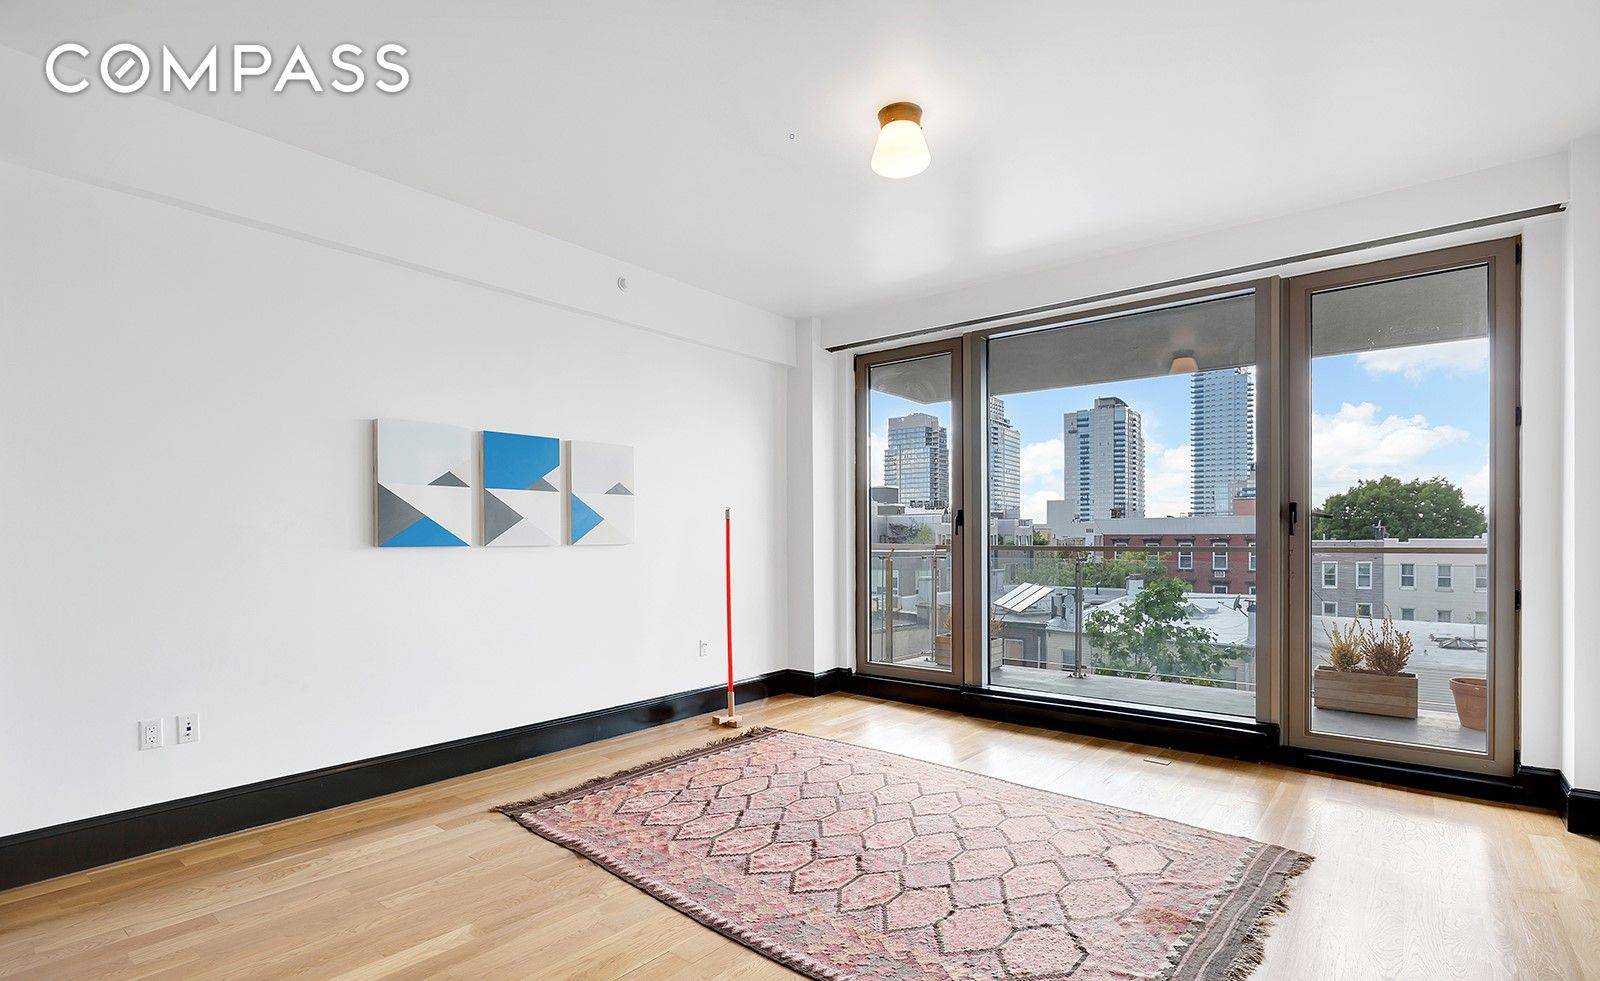 RIVER FACING TWO BED TWO BATH WITH PRIVATE TERRACE AND PRIVATE STORAGE PARKING SPOT AVAILABLE FOR AN ADDITIONAL FEE Welcome home to Residence 4A at 144 North 8th Street, a ...